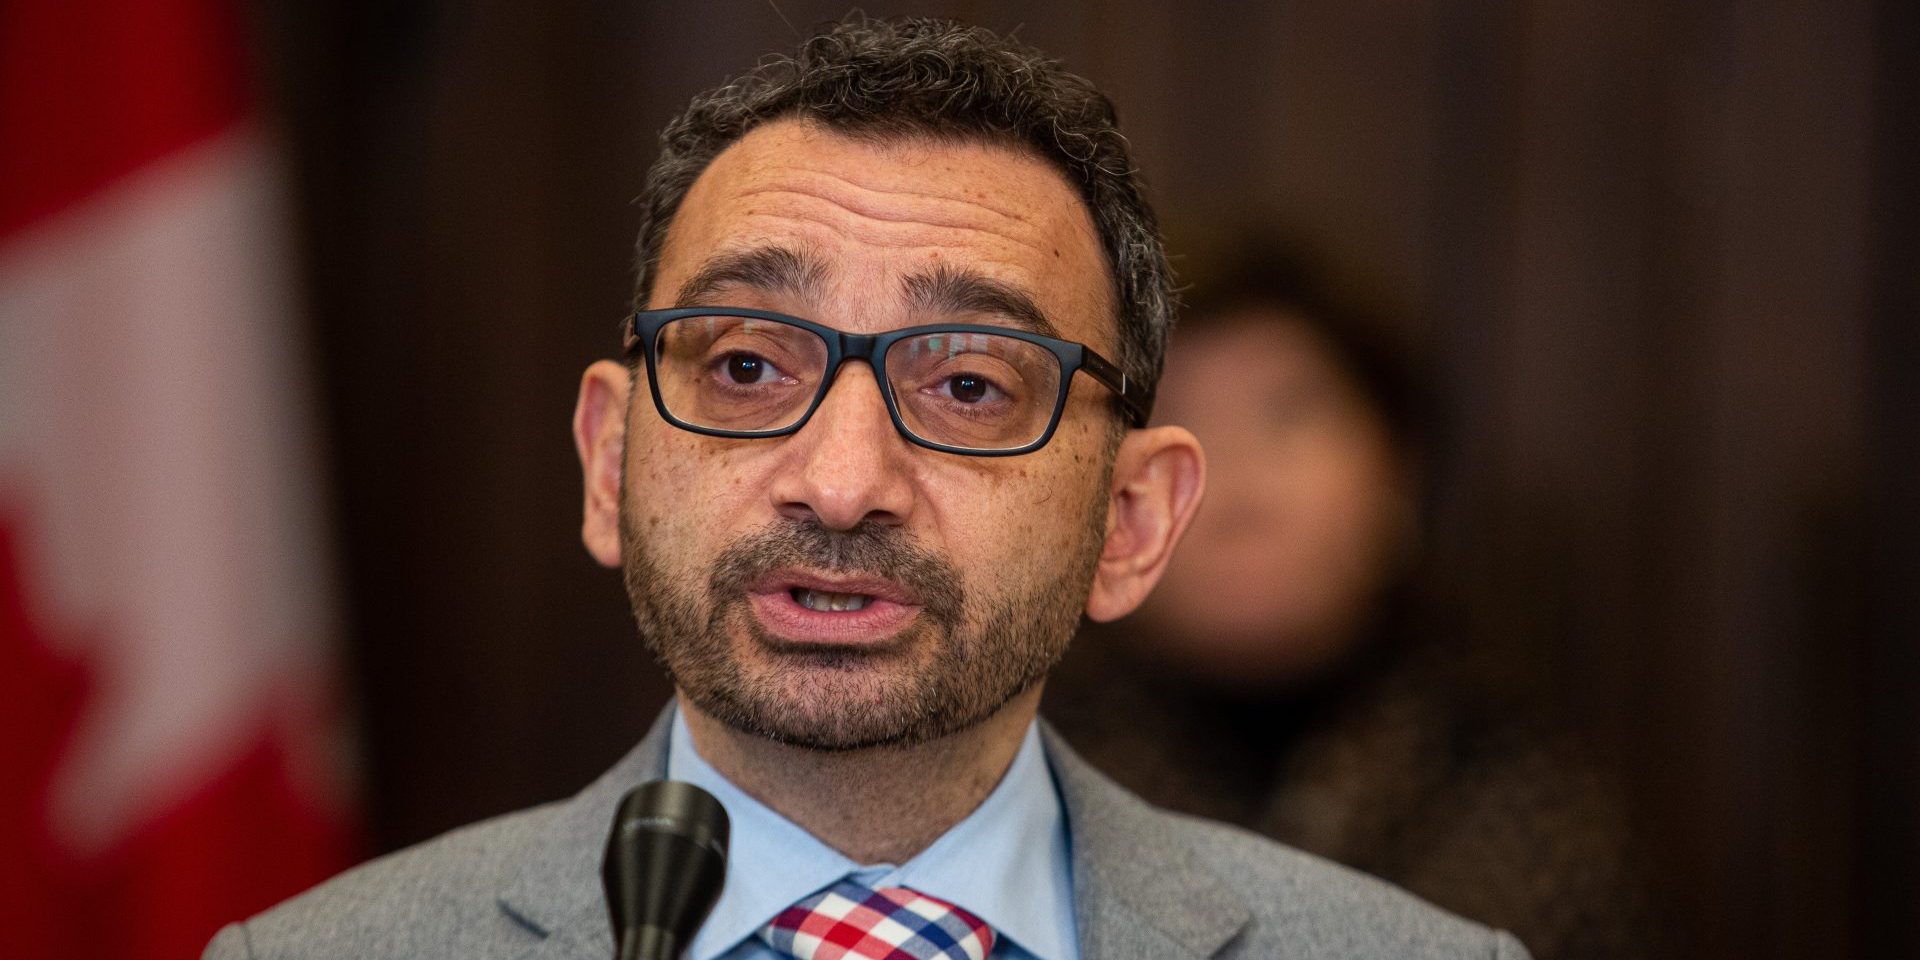 Minister of Transport Omar Alghabra speaks with reporters on March 27, 2023, after the Auditor General’s March 2023 reports are tabled in the House of Commons. The Hill Times photograph by Andrew Meade